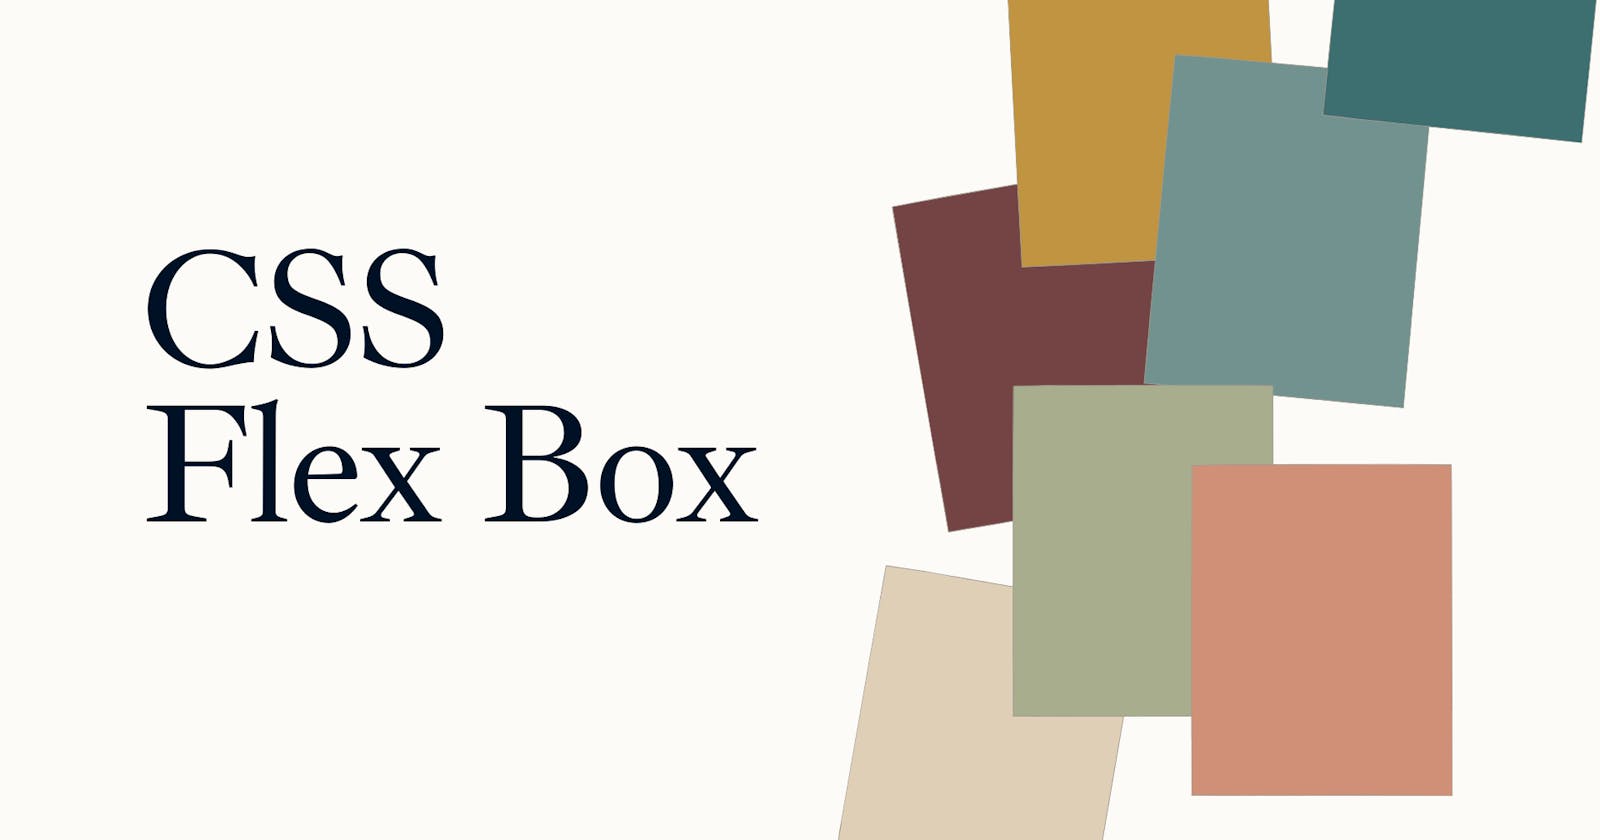 Flexbox Layout in CSS